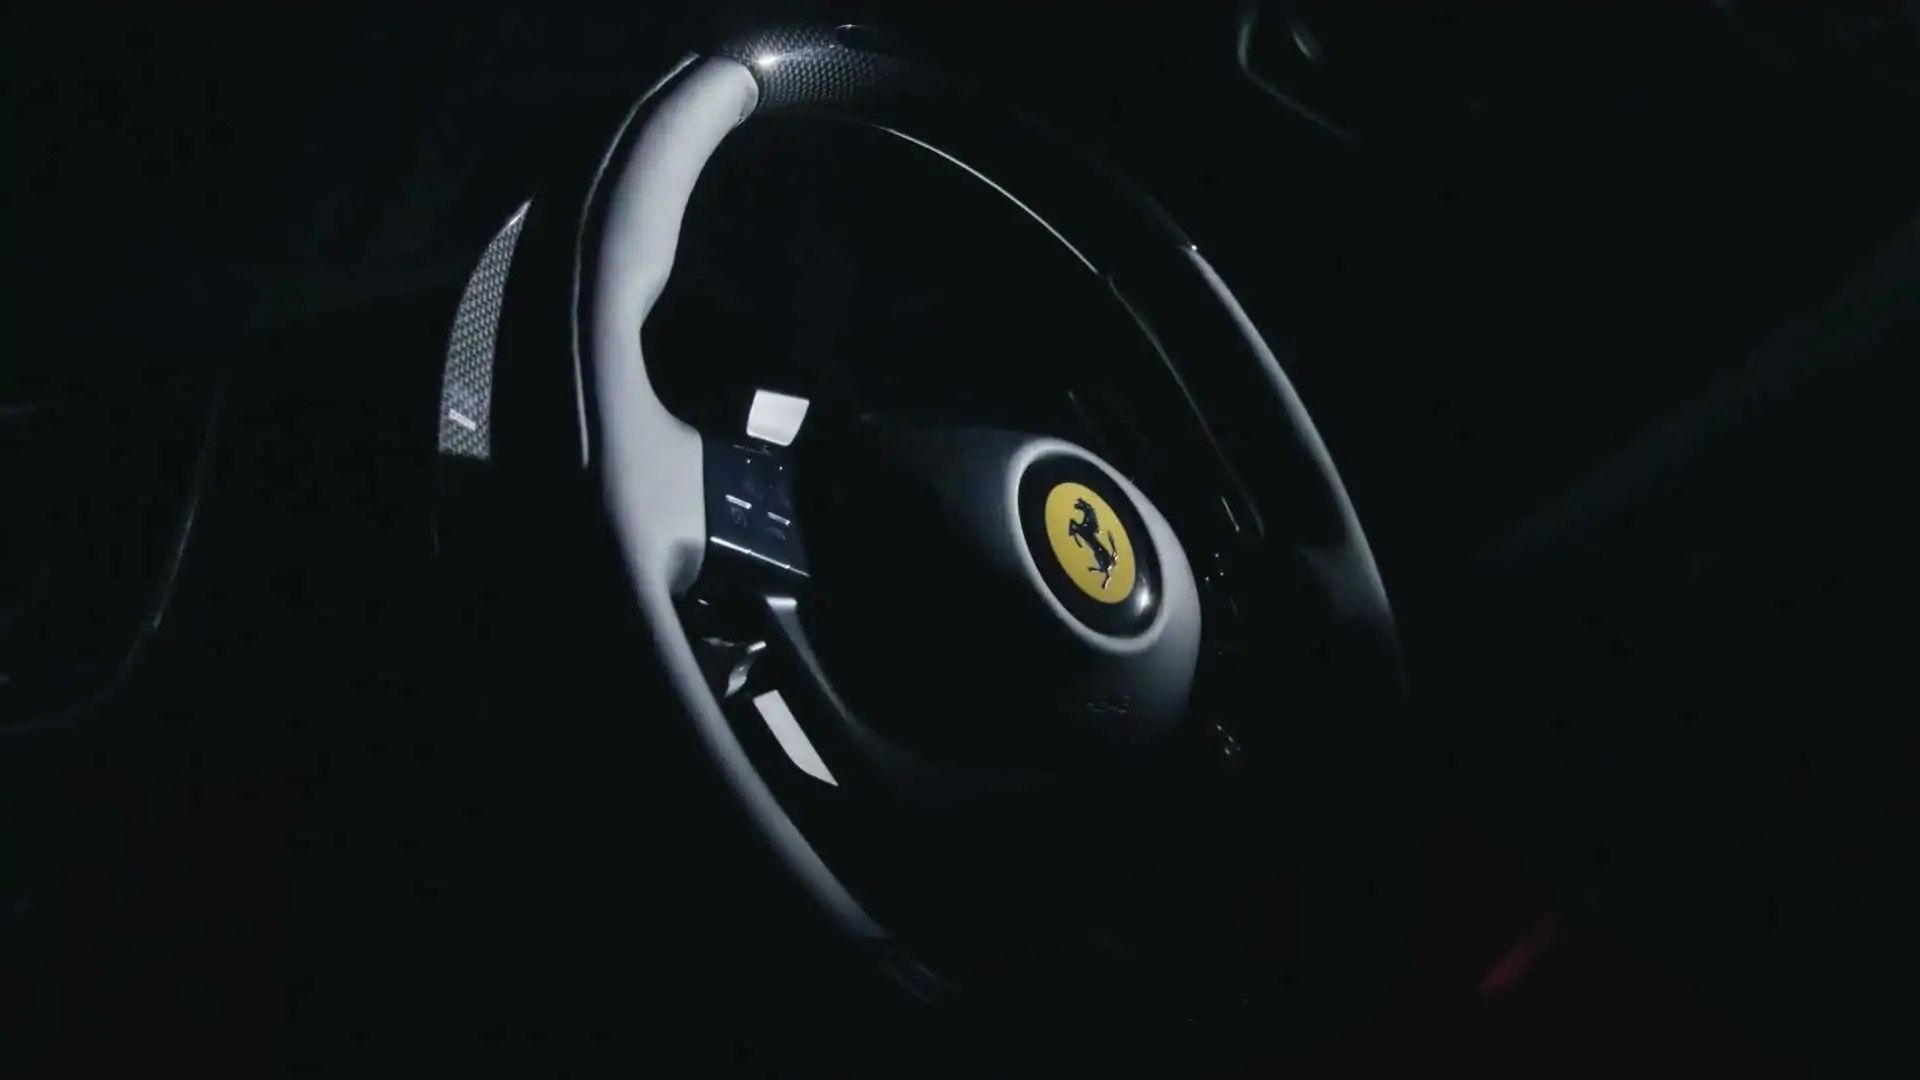 The steering wheel of the mystery Ferrari to be unveiled on March 16